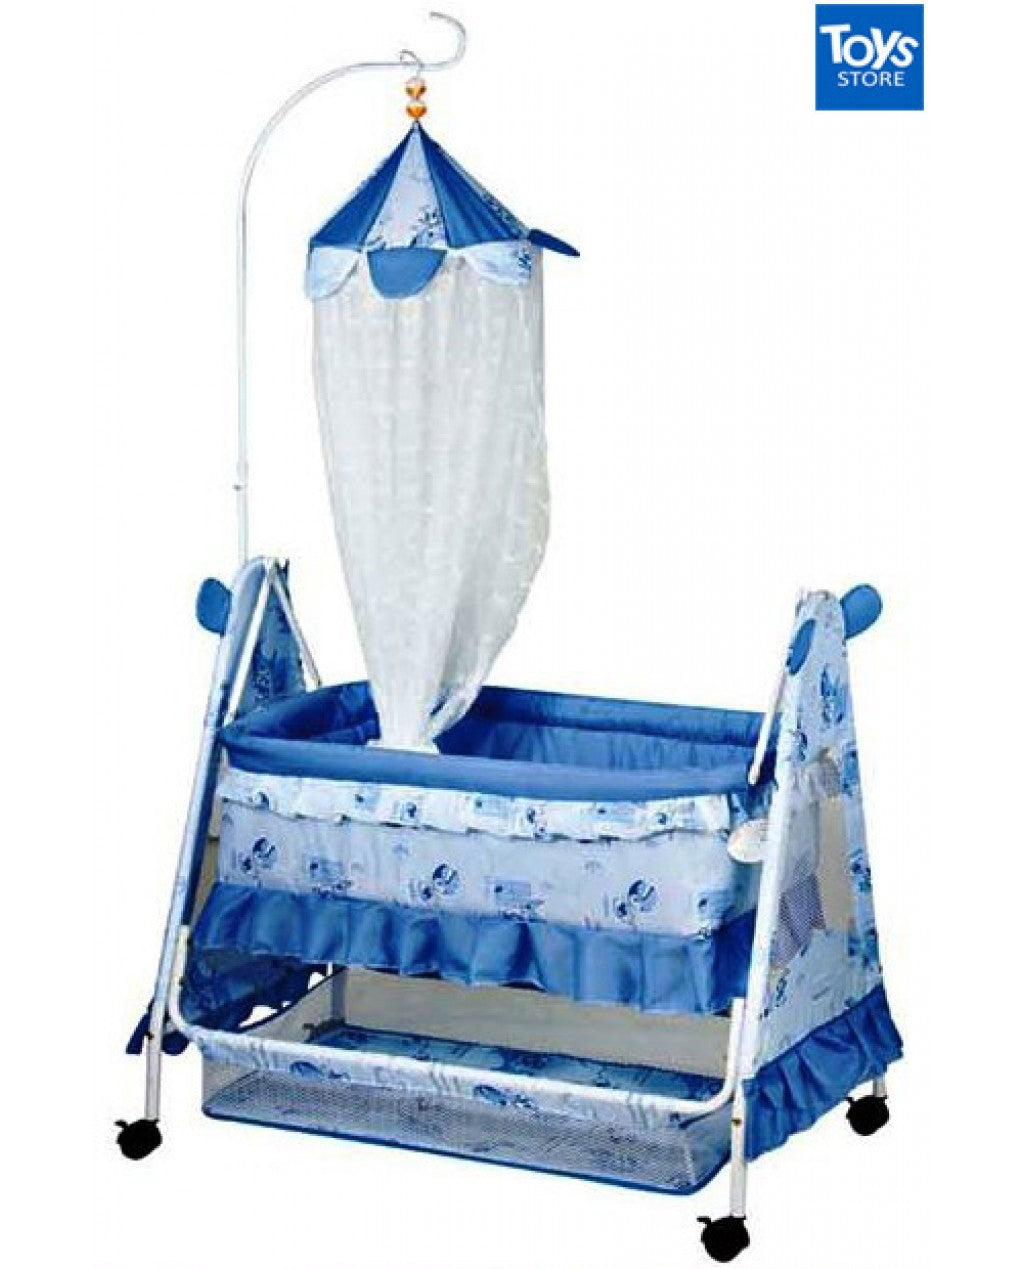 Kids Baby Cradle High Quality Child Cradel Baby Swing With Mosquito Net - New Born Baby Swing Baby Coat Baby Cradle Baby Cot With Wheel Moveable Portable Traveling Swing Baby Jhula Multi Color